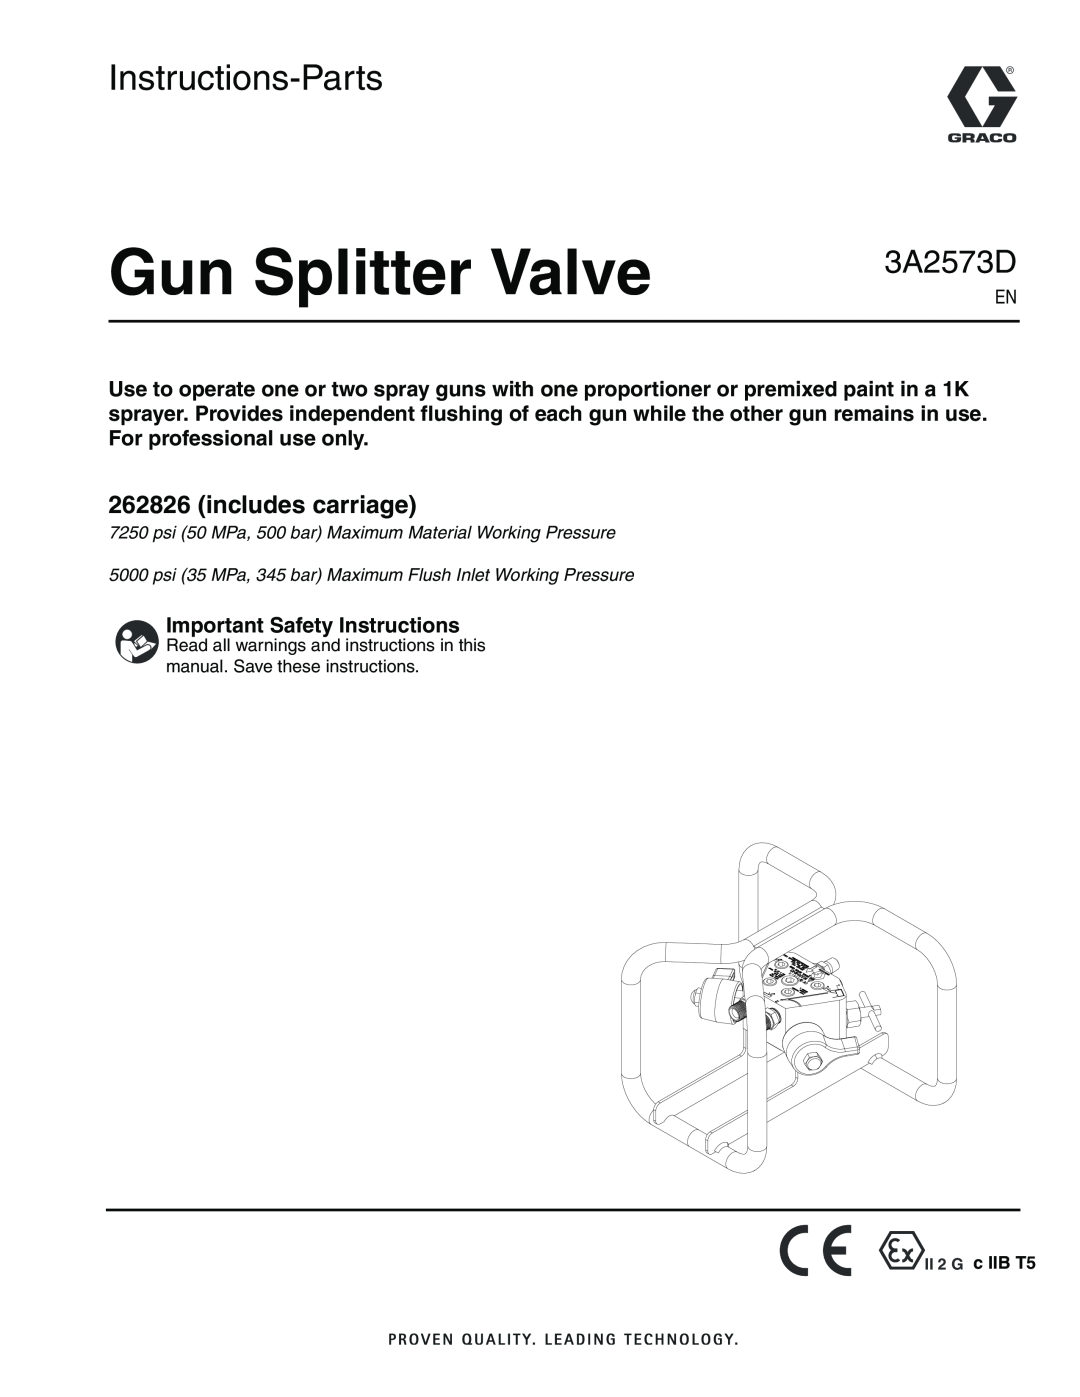 Graco 3A2573D important safety instructions Gun Splitter Valve, Instructions-Parts, includes carriage 